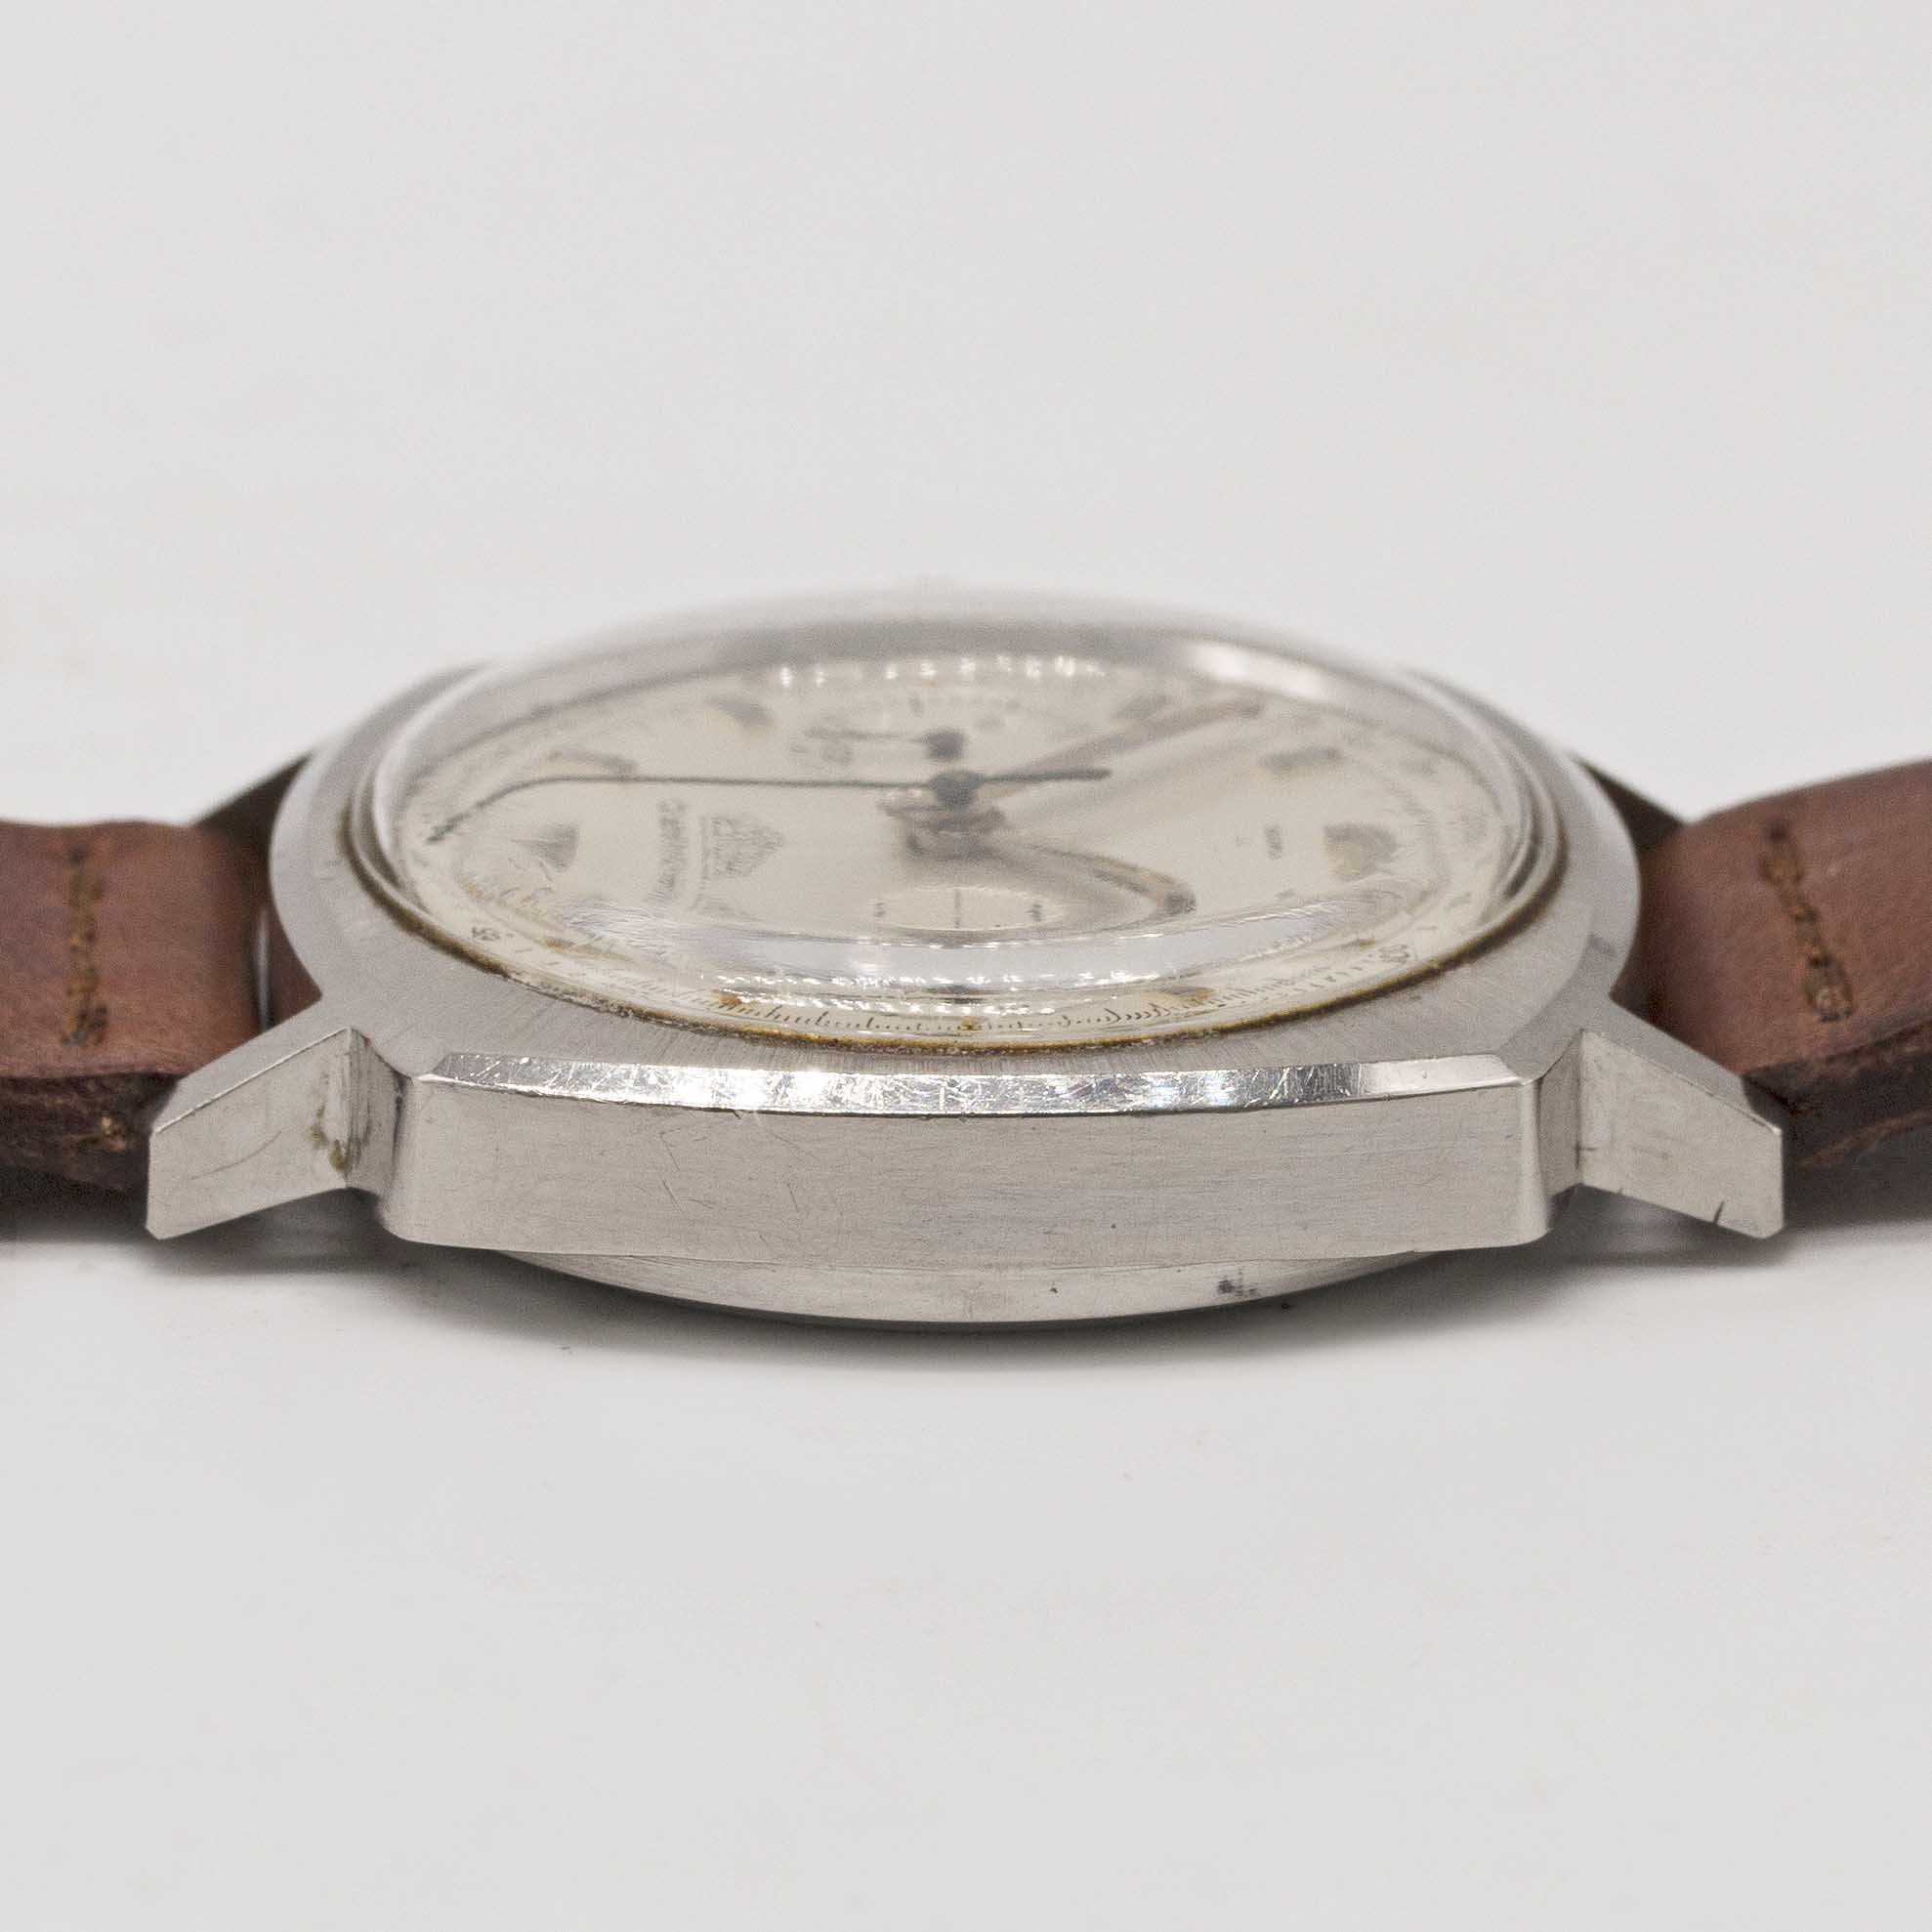 A GENTLEMAN'S STAINLESS STEEL HEUER CAMARO CHRONOGRAPH WRIST WATCH CIRCA 1970, REF. 9220T WITH - Image 9 of 9